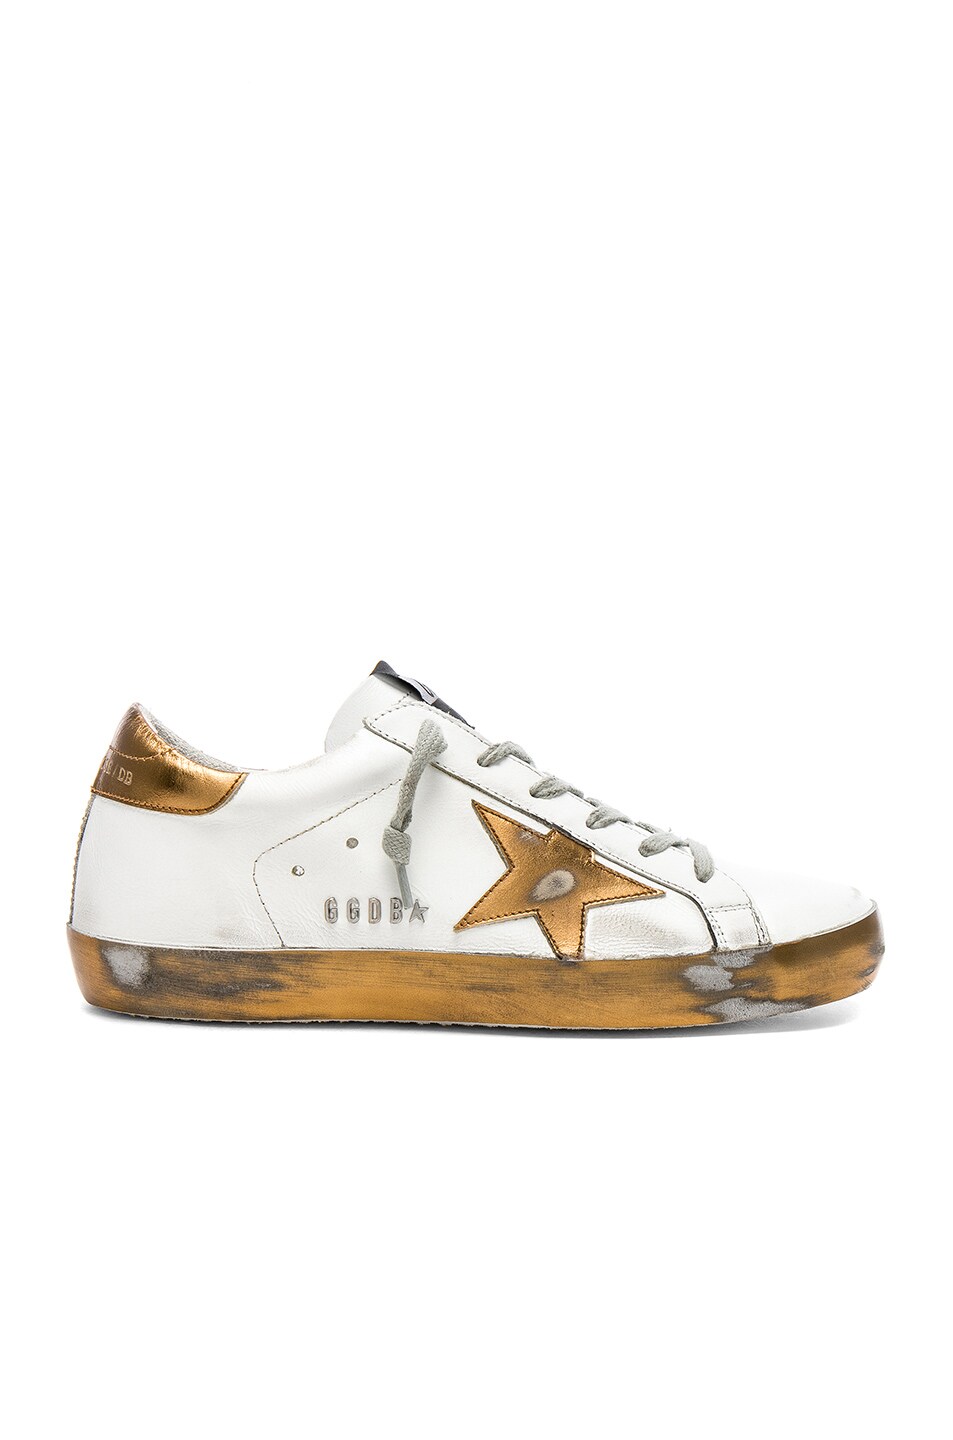 Image 1 of Golden Goose Leather Superstar Sneakers in Sparkle White & Bronze Star